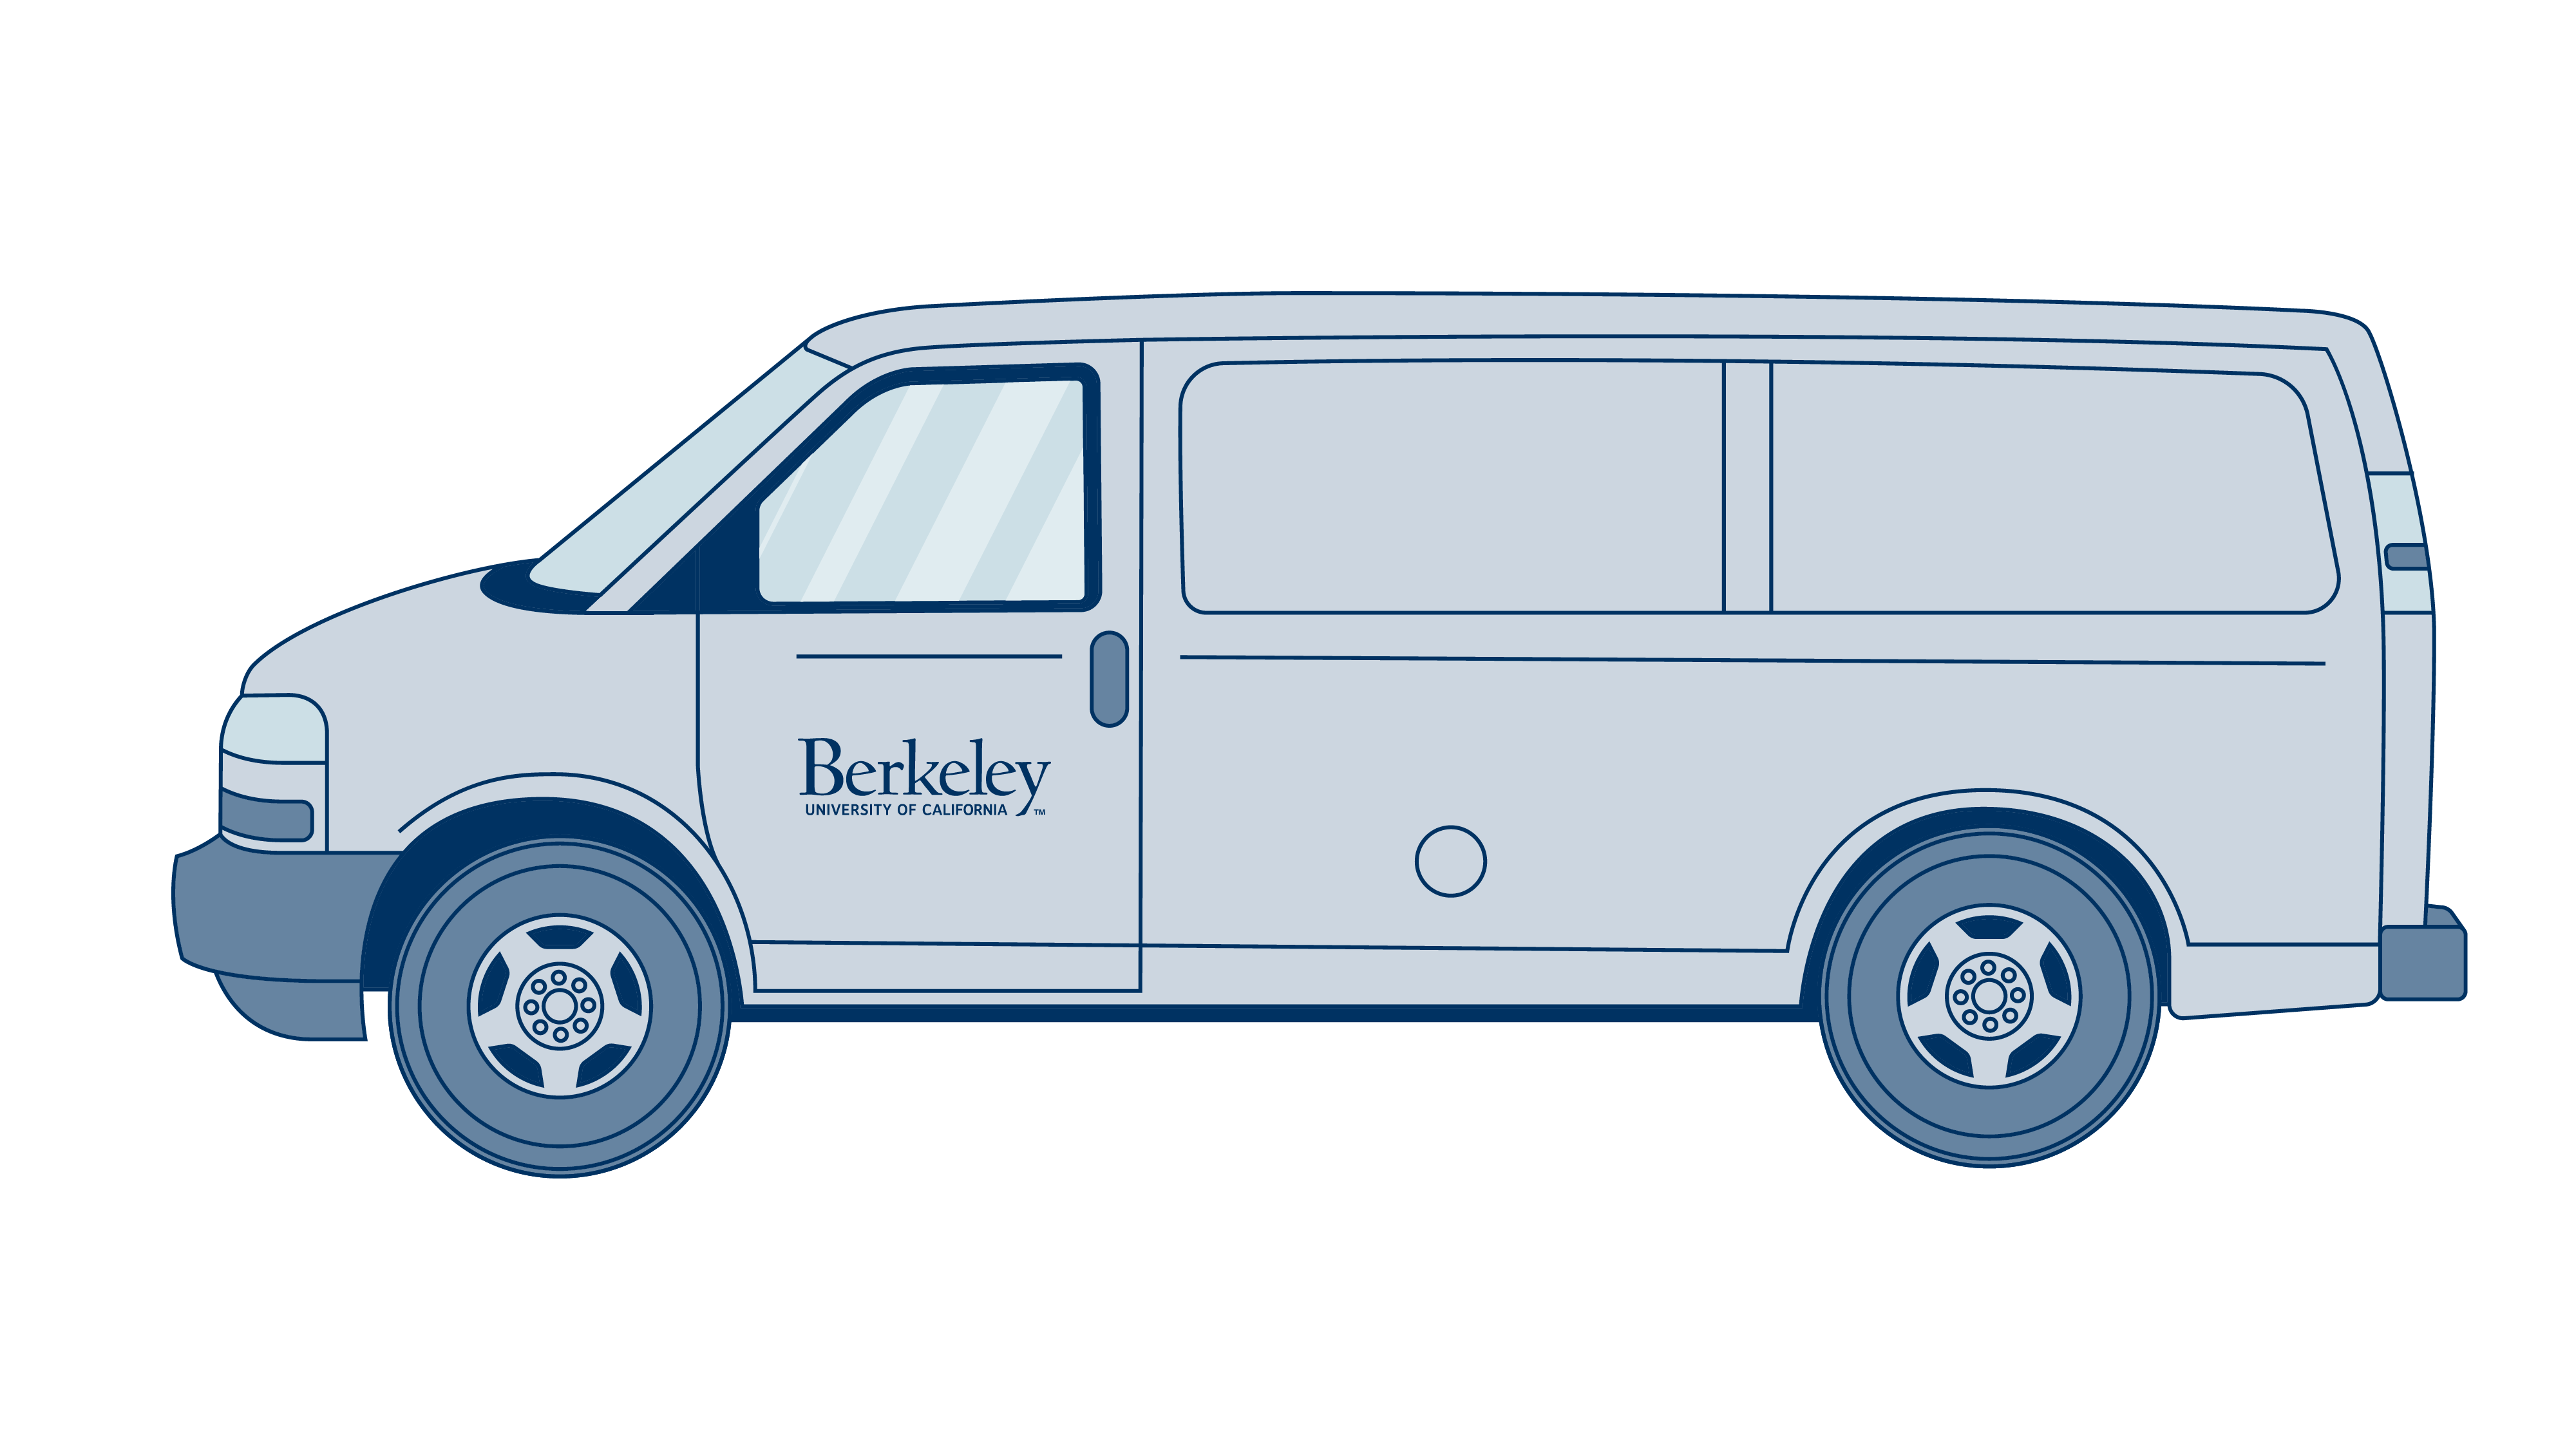 Diagram of logo placement on a cargo van